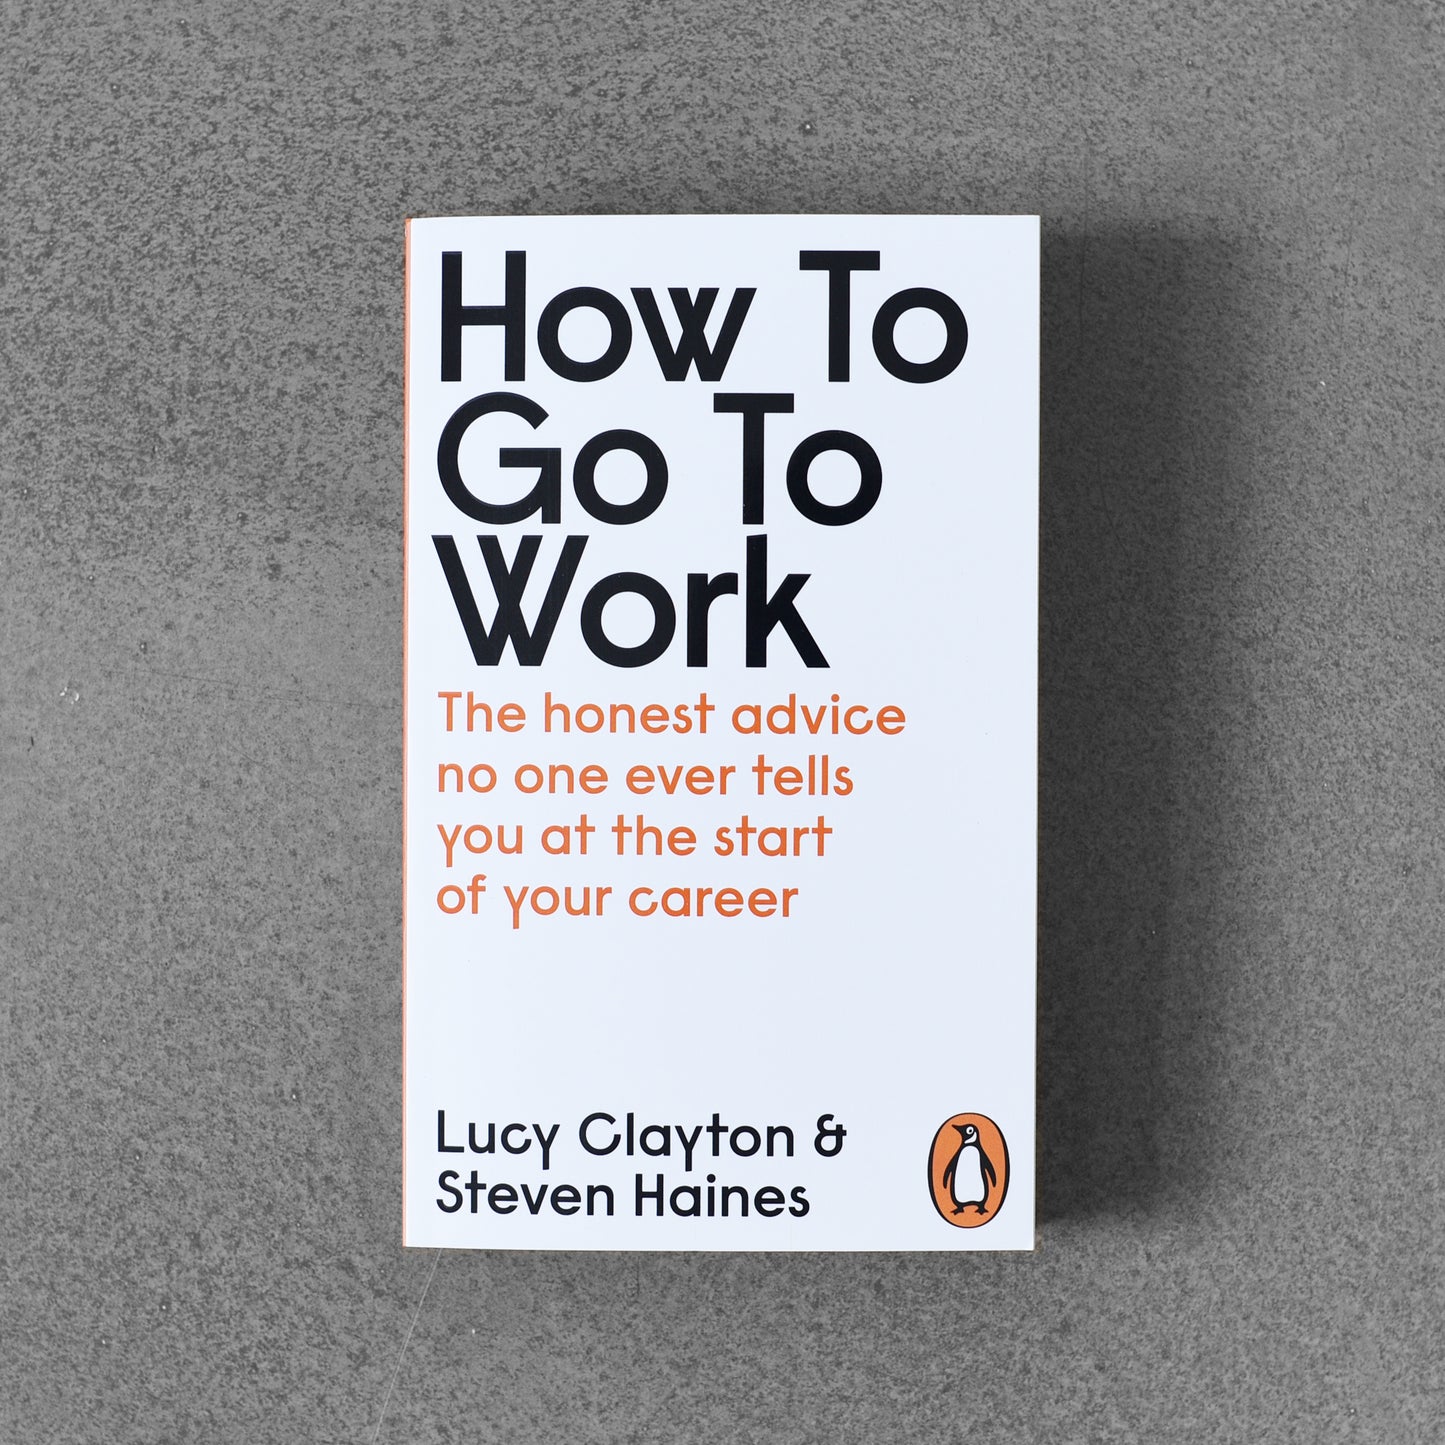 How to Go to Work: The Honest Advice No One Ever Tells You at The Start of Your Career - Lucy Clayton & Steven Haines